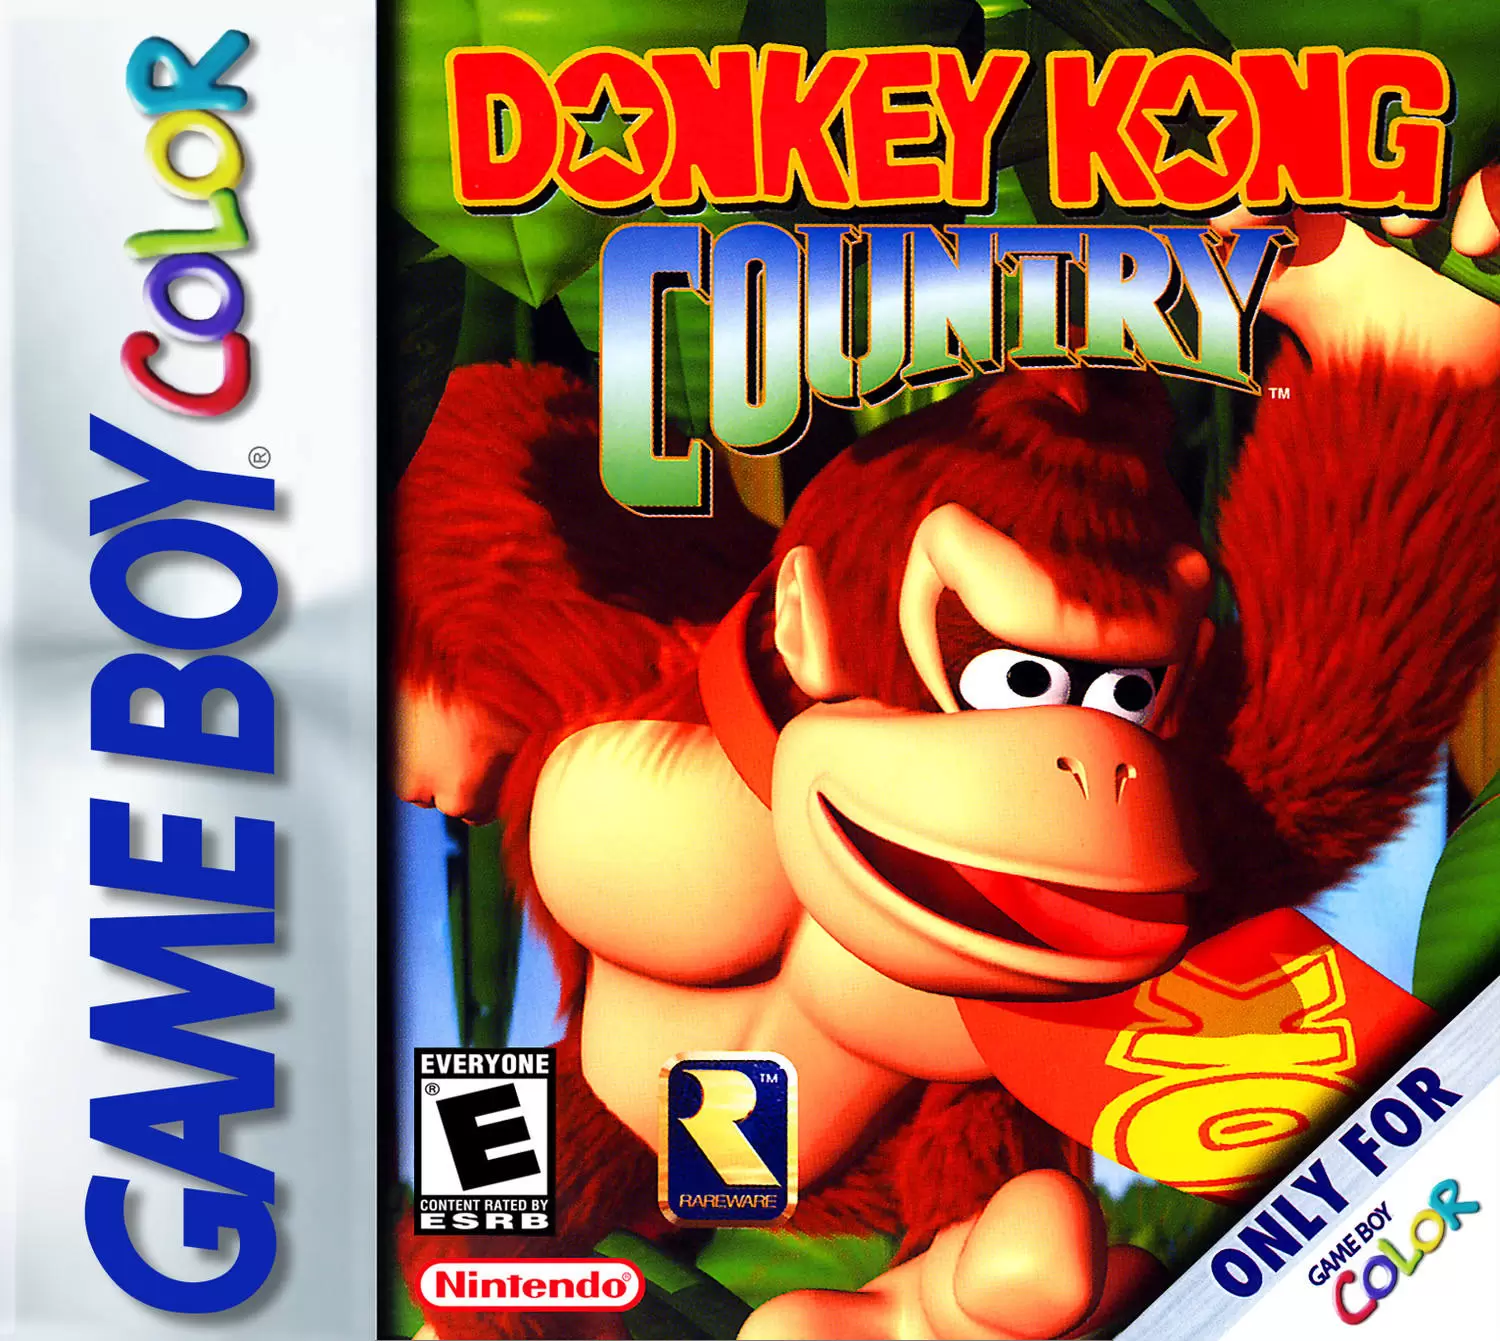 Game Boy Color Games - Donkey Kong Country